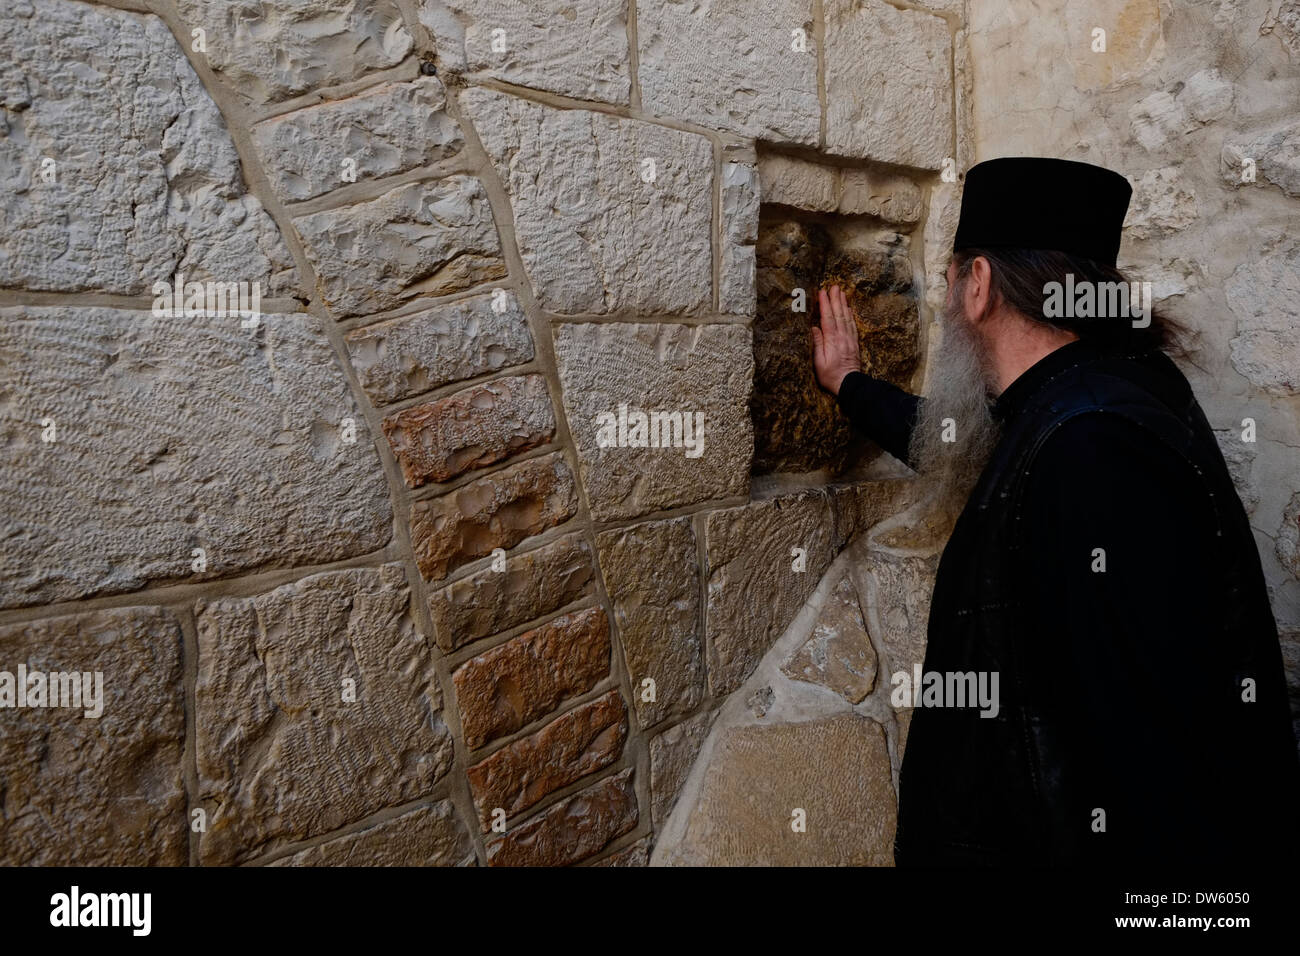 An Eastern Orthodox priest puts his palm on a square stone believed to be imprint of Jesus hand on the sunken part of the exterior wall of the Chapel of Simon of Cyrene, at the 5th station of the cross in Via Dolorosa street old city East Jerusalem Israel Stock Photo